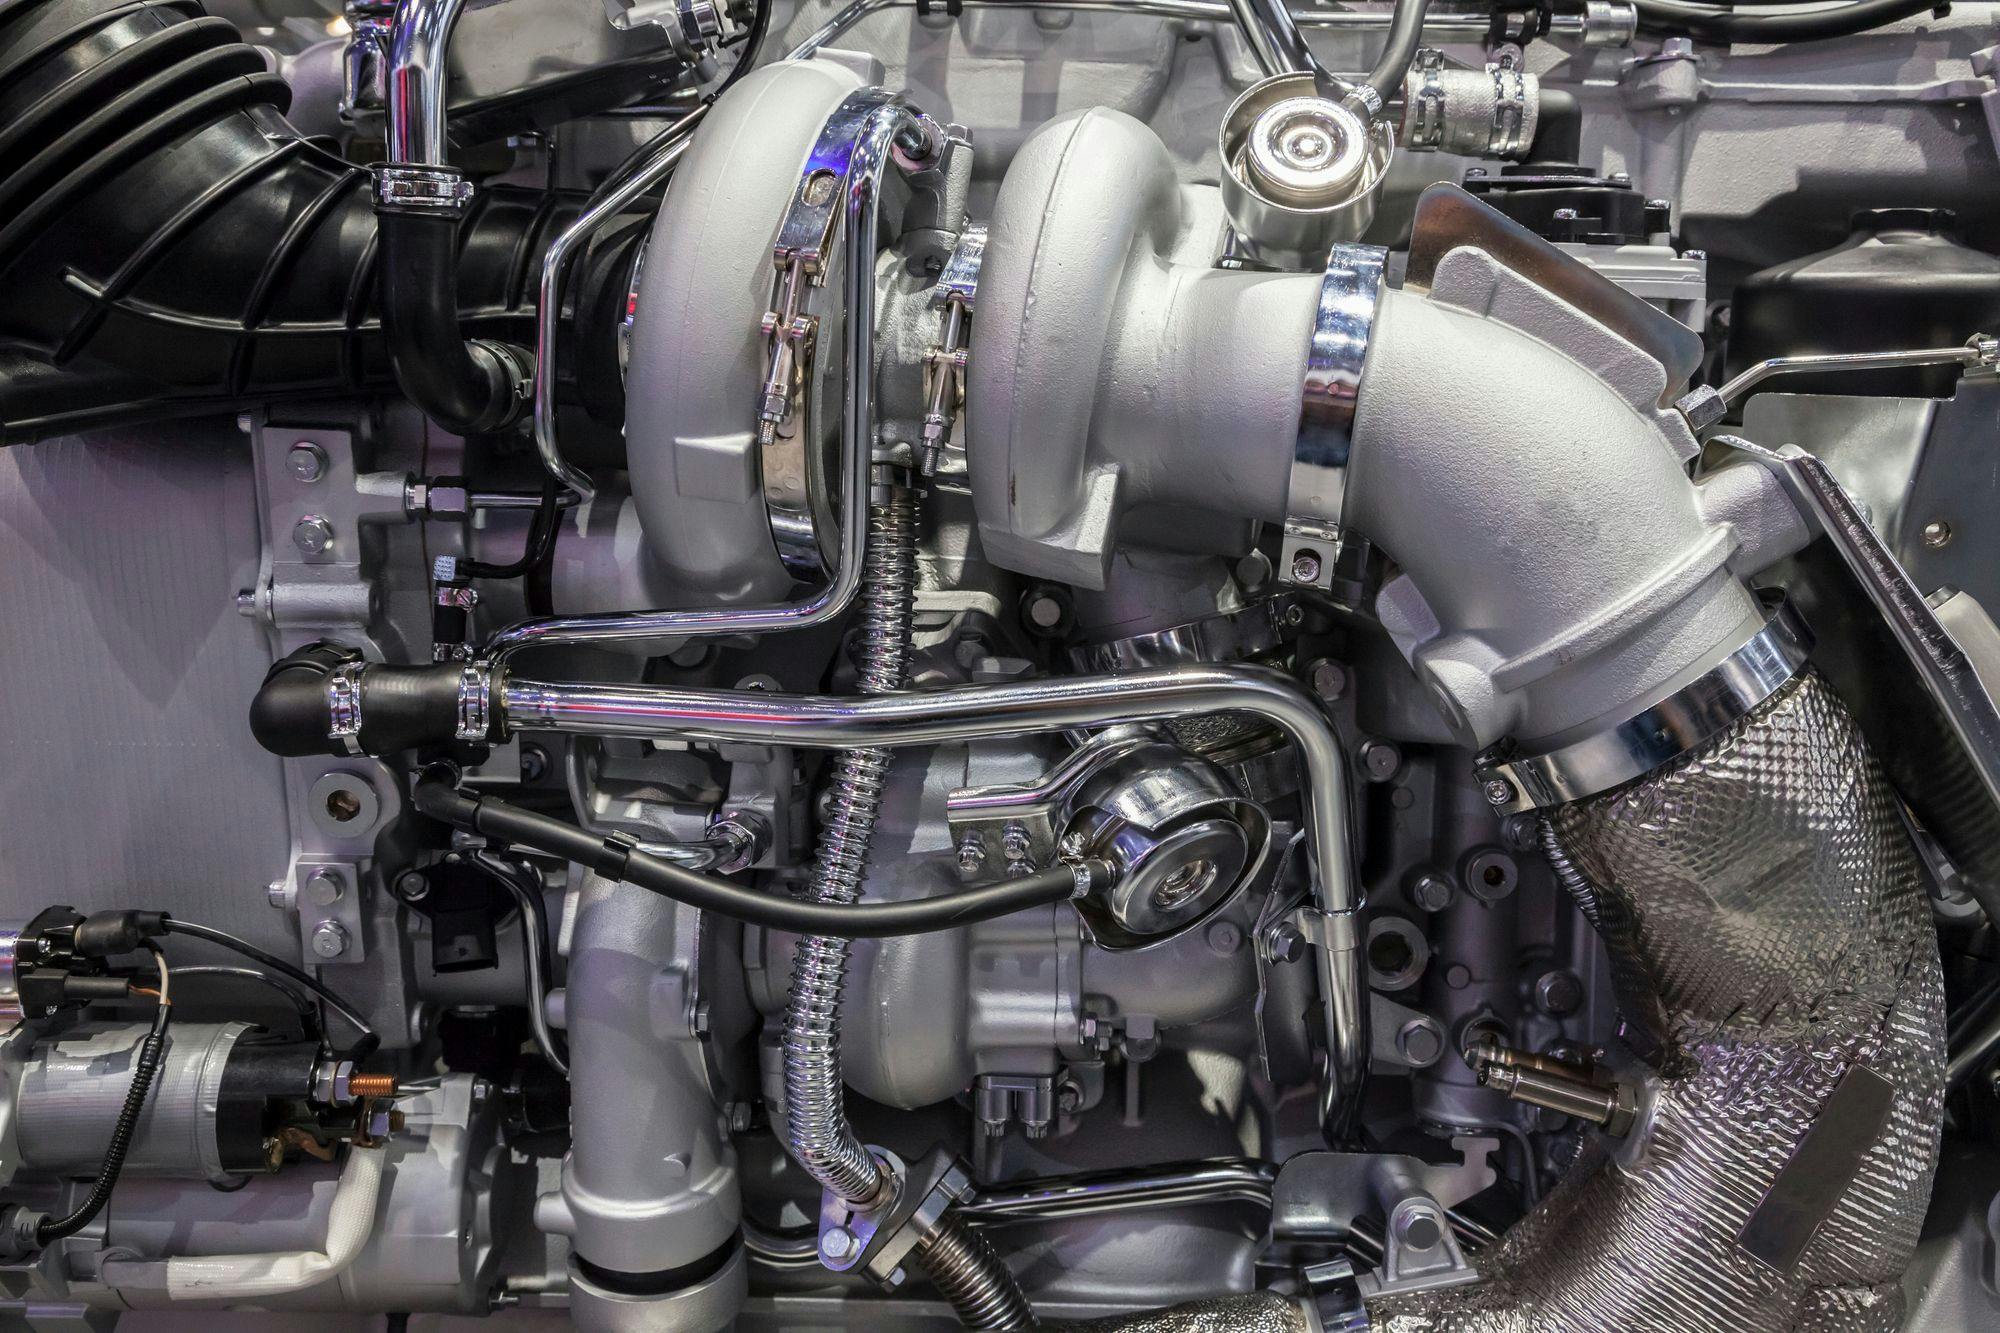 Unlock your engine's potential with performance upgrades and tuning. Explore options for Cummins ISX and Detroit DD15 engines with Advanced Diesel Tech.